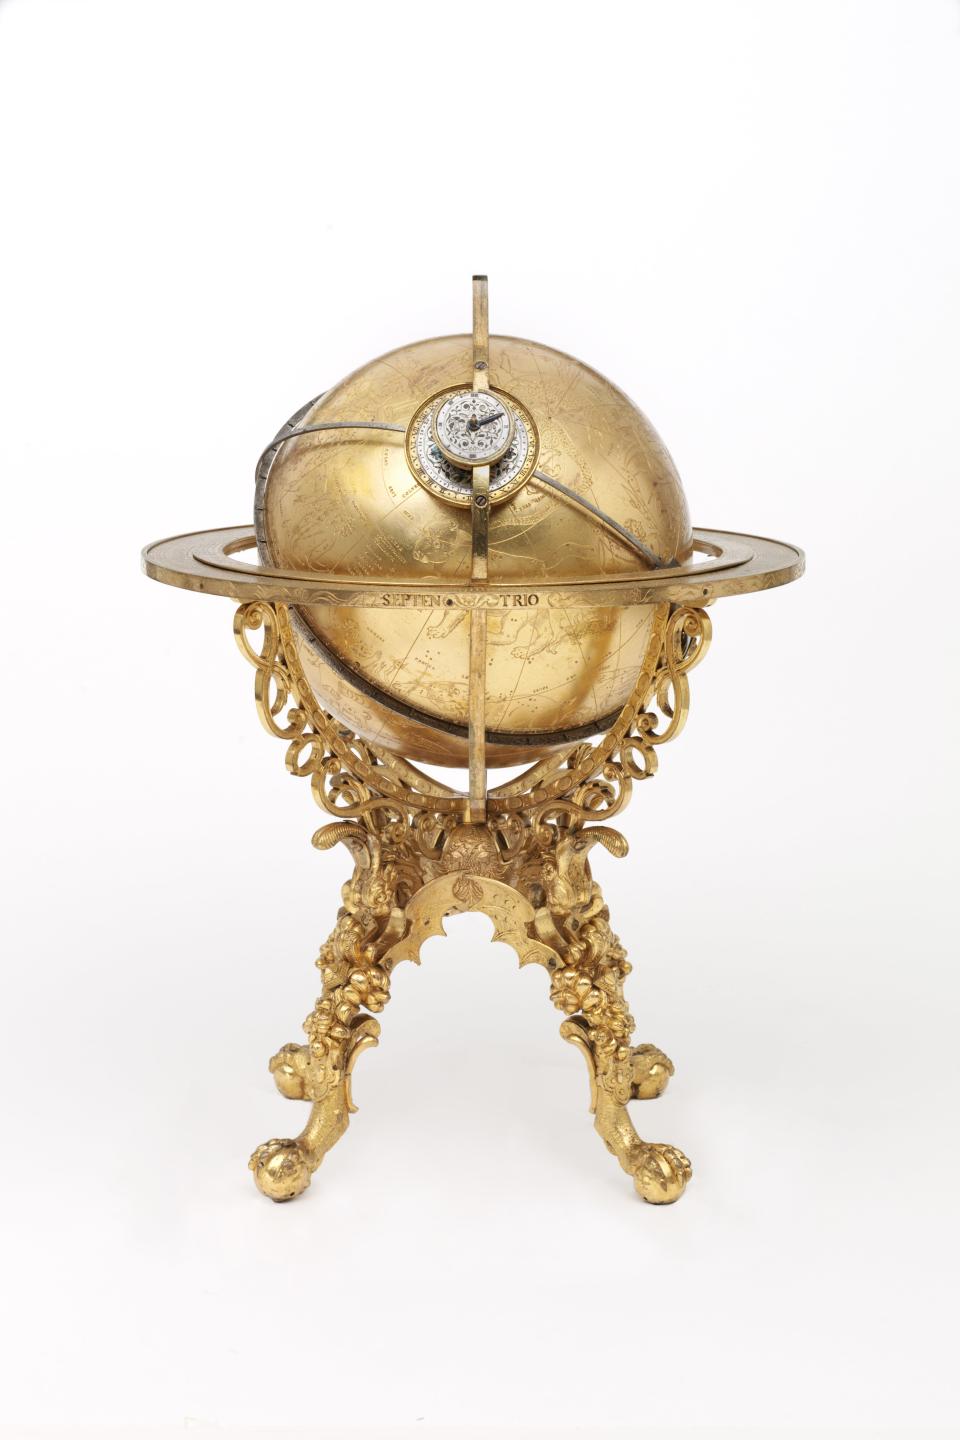 Georg Roll and Johannes Reinhold
Mechanical globe clock
Augsburg, 1584
Gilded copper alloy
43.6 × 26.5 × 26.5 cm
Victoria and Albert Museum, 246-1865
